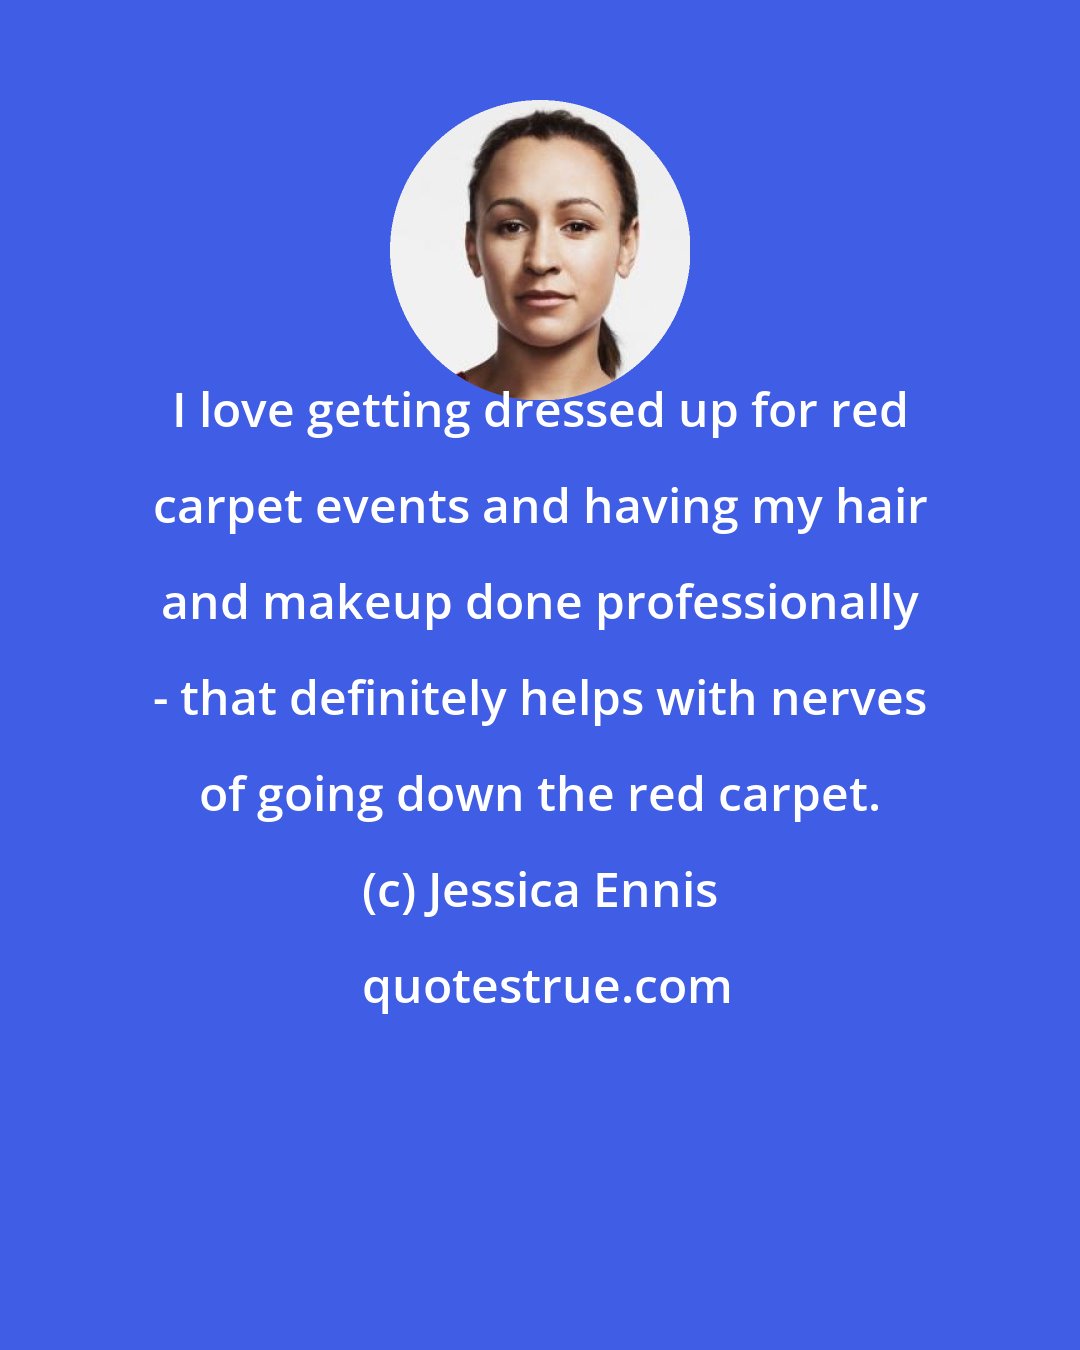 Jessica Ennis: I love getting dressed up for red carpet events and having my hair and makeup done professionally - that definitely helps with nerves of going down the red carpet.